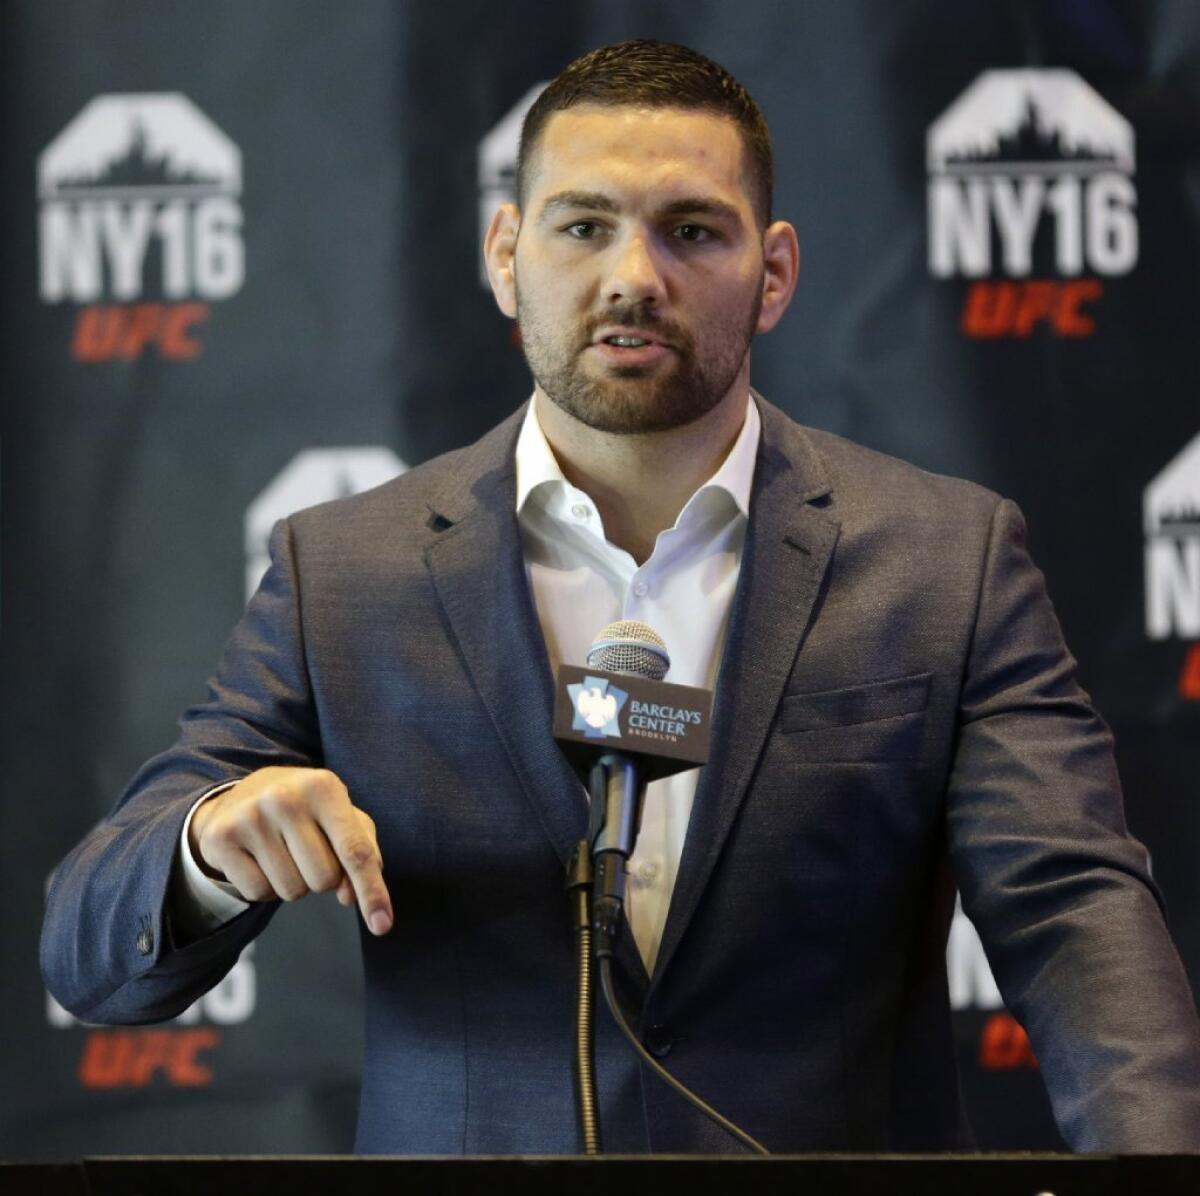 Former UFC champion Chris Weidman speaks at a news conference on Feb. 23 in support of legalizing mixed martial arts fighting in New York state.